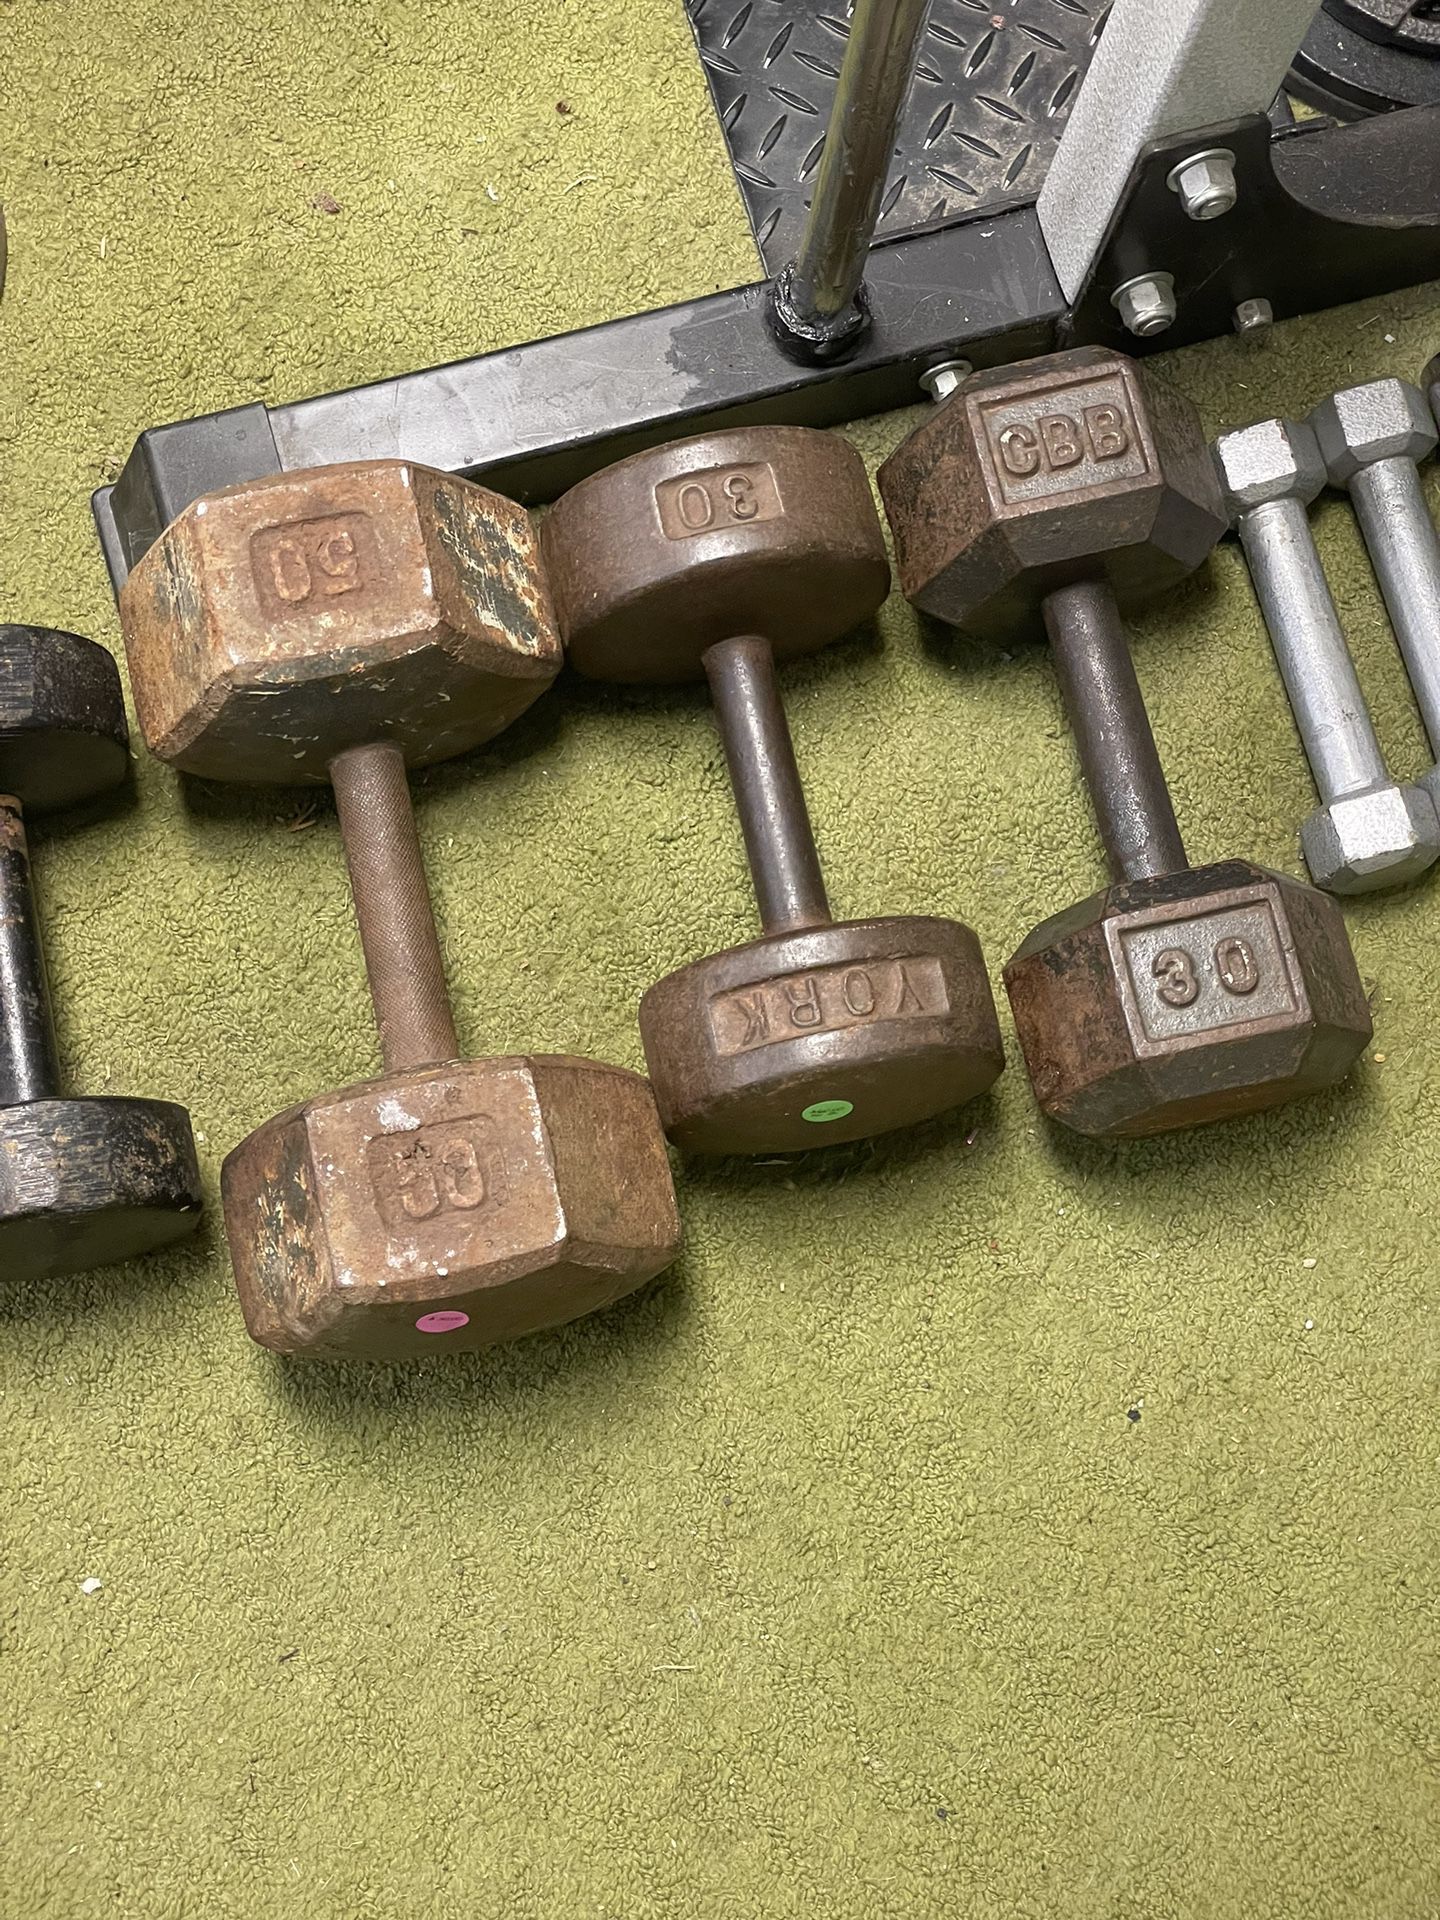 Dumbbell weights for sale. I have 50 pounds and 230s and one20 a $ a pound for each of them.